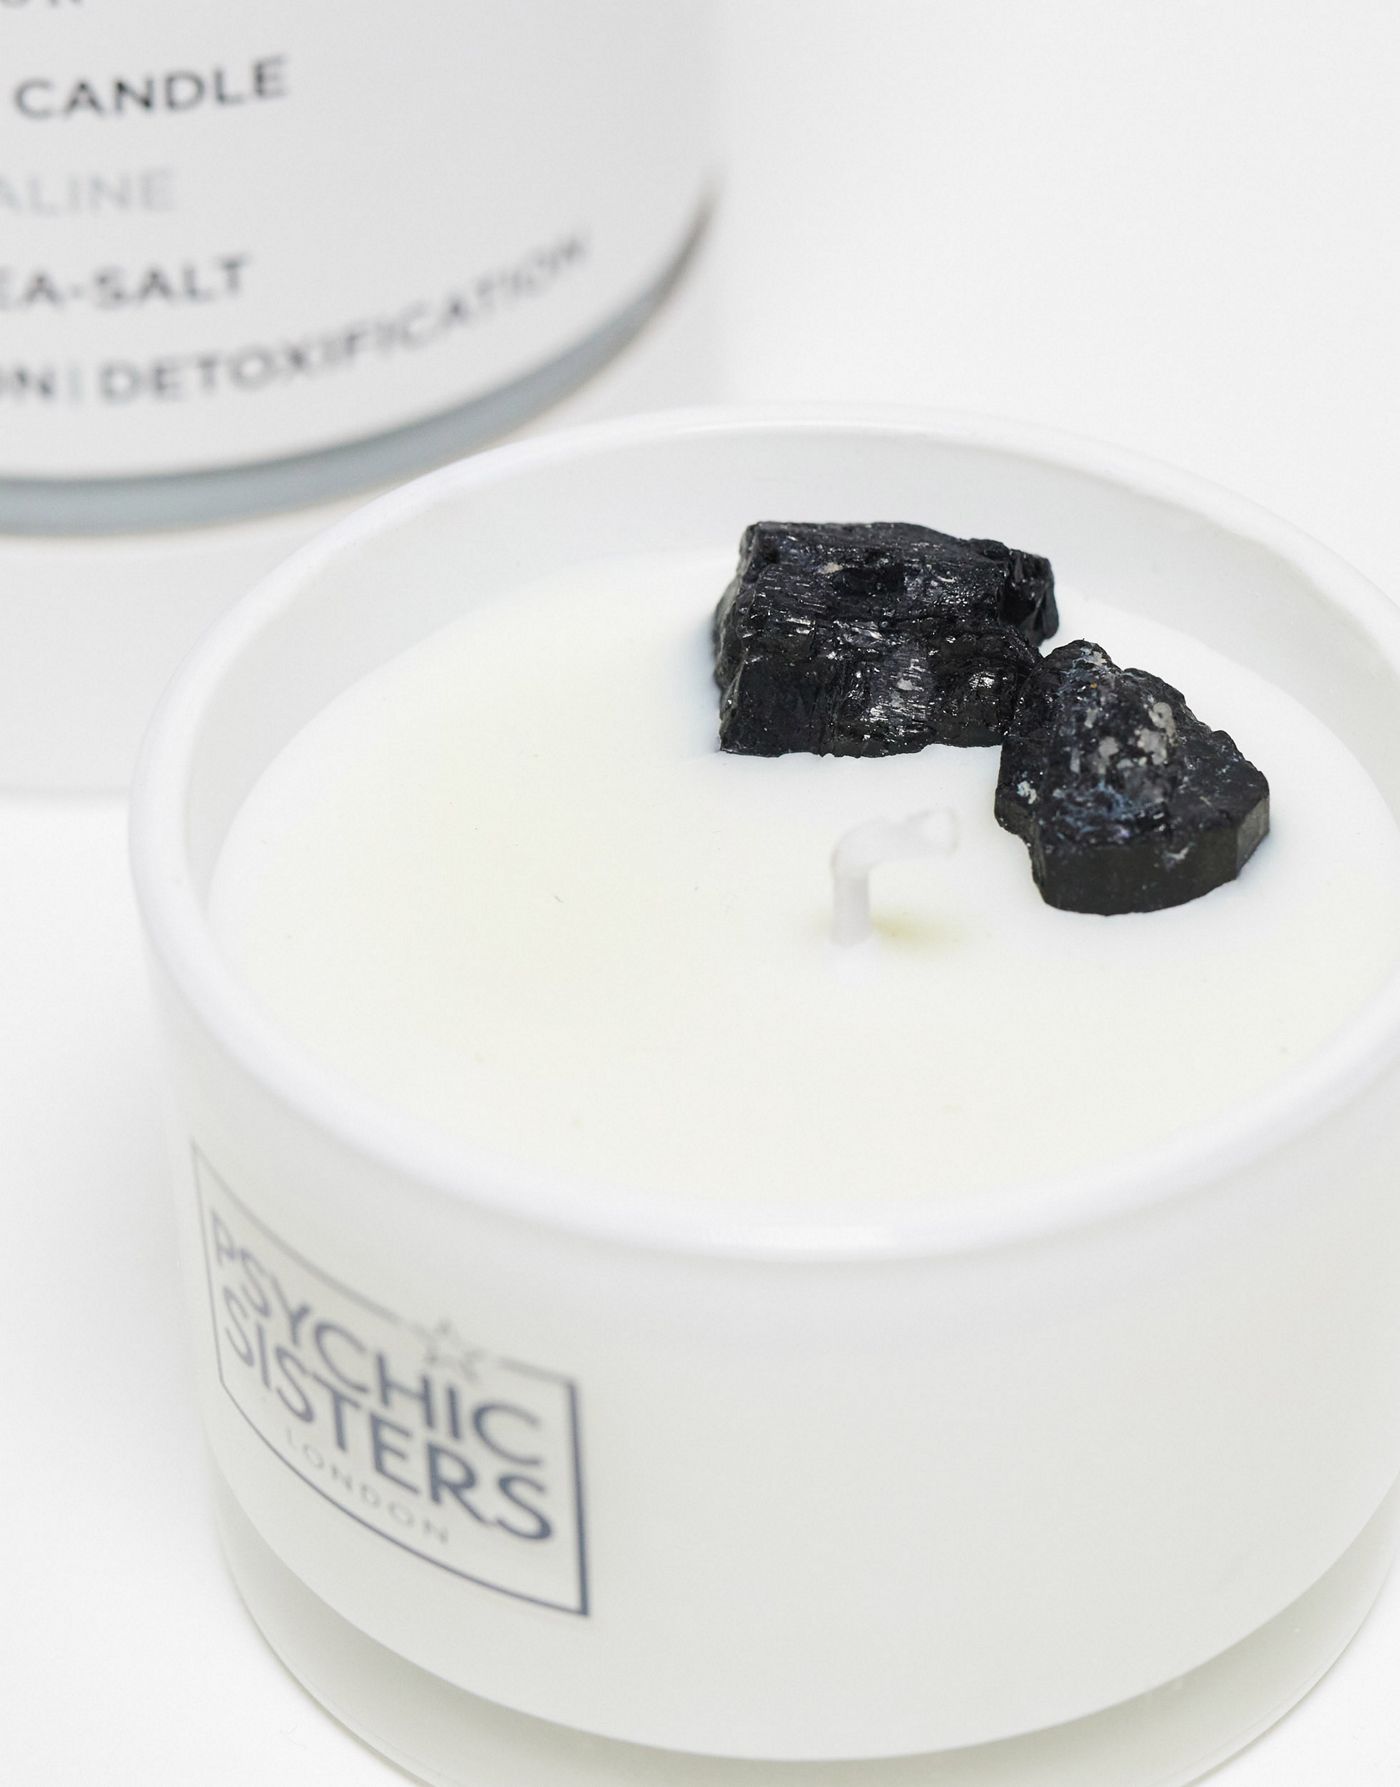 Psychic Sisters x ASOS Exclusive Black Obsidian Gemstone Candle 100g